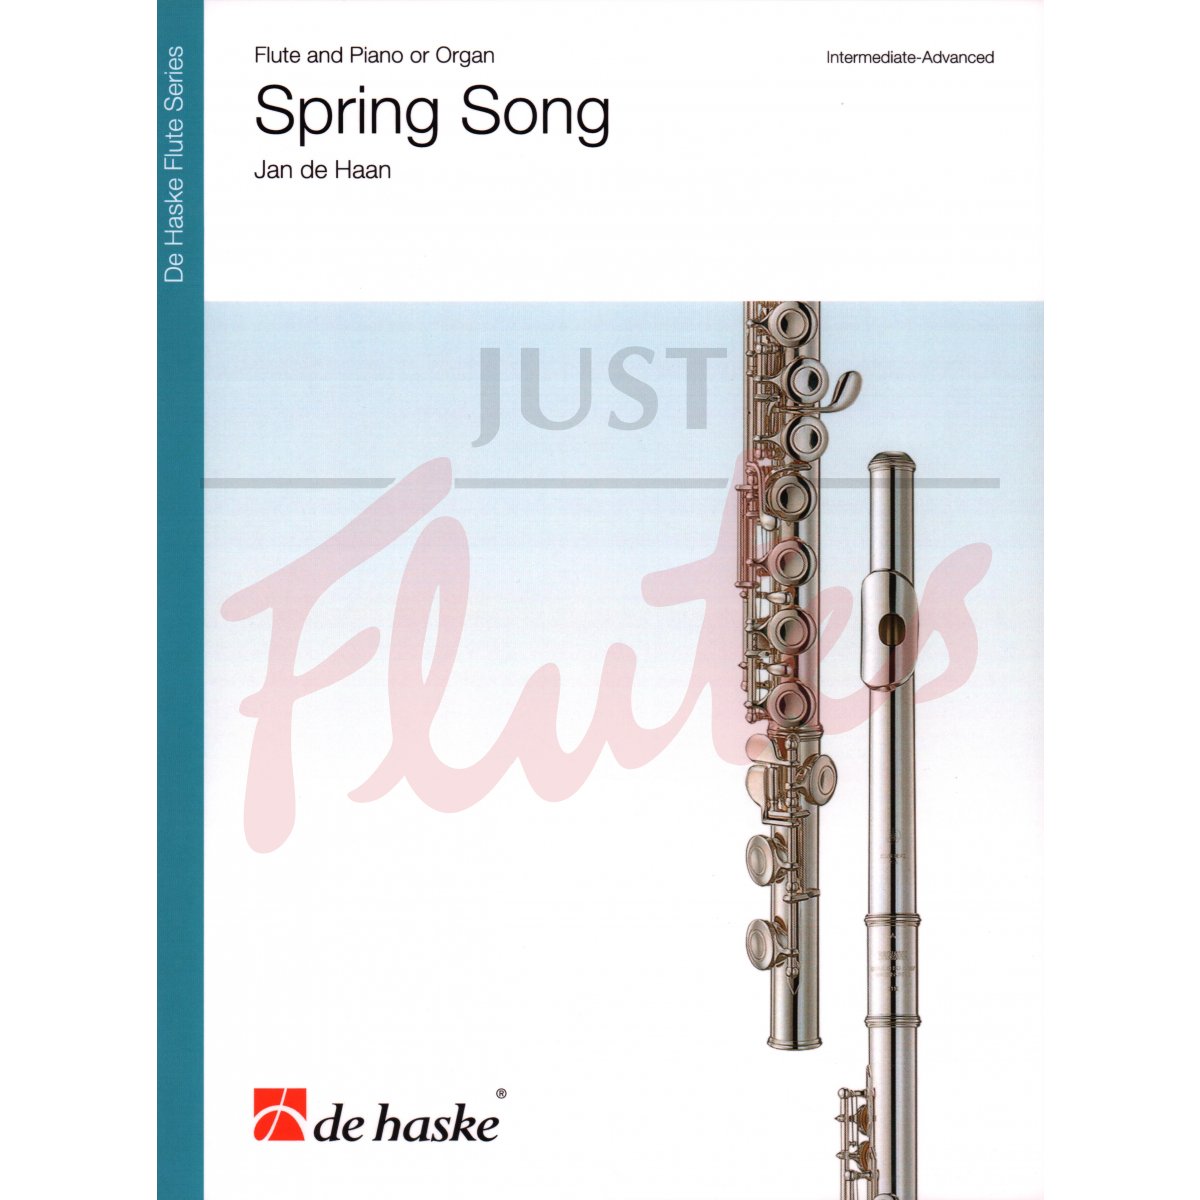 Spring Song for Flute and Piano/Organ